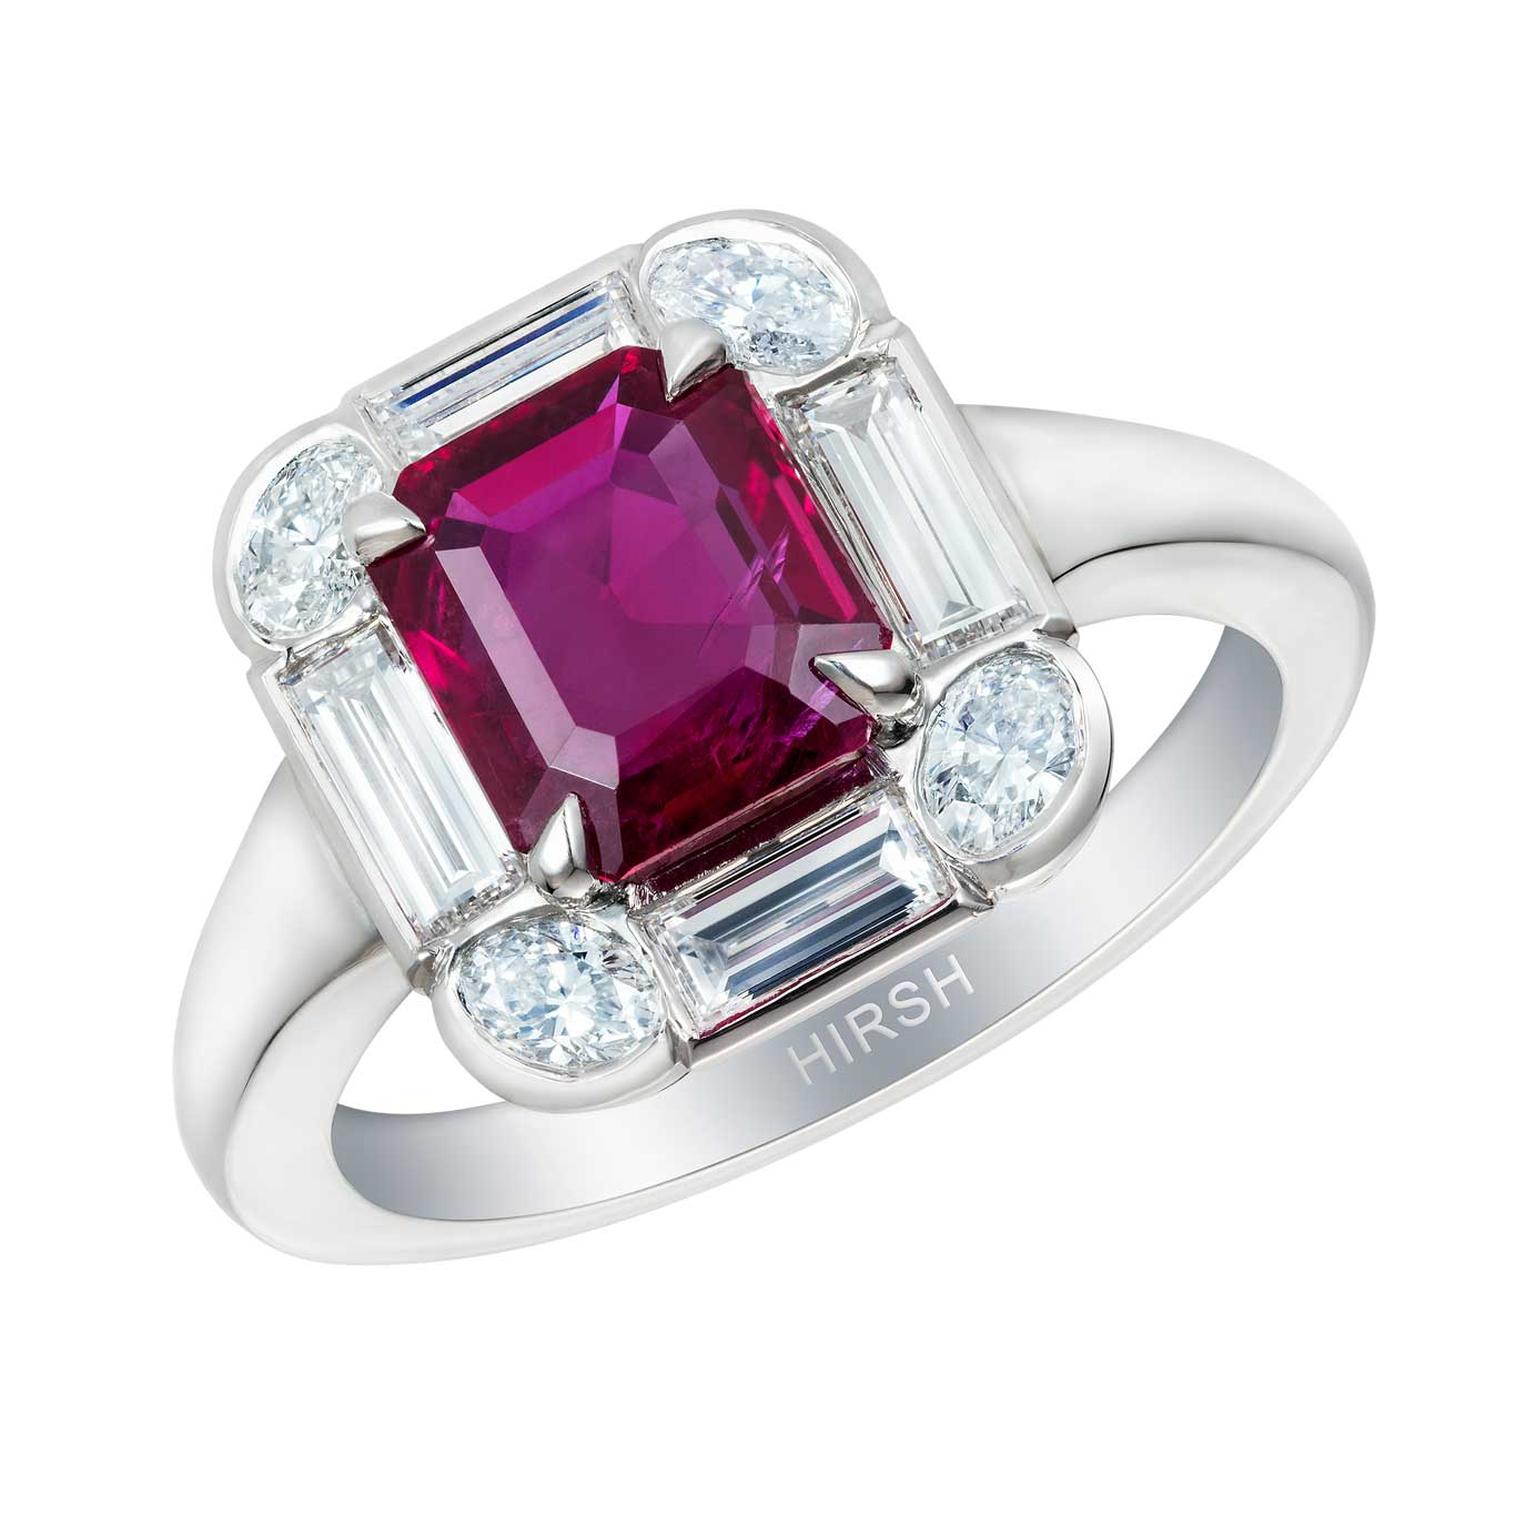 Hirsh-Ice-ring-with-ruby-and-diamonds